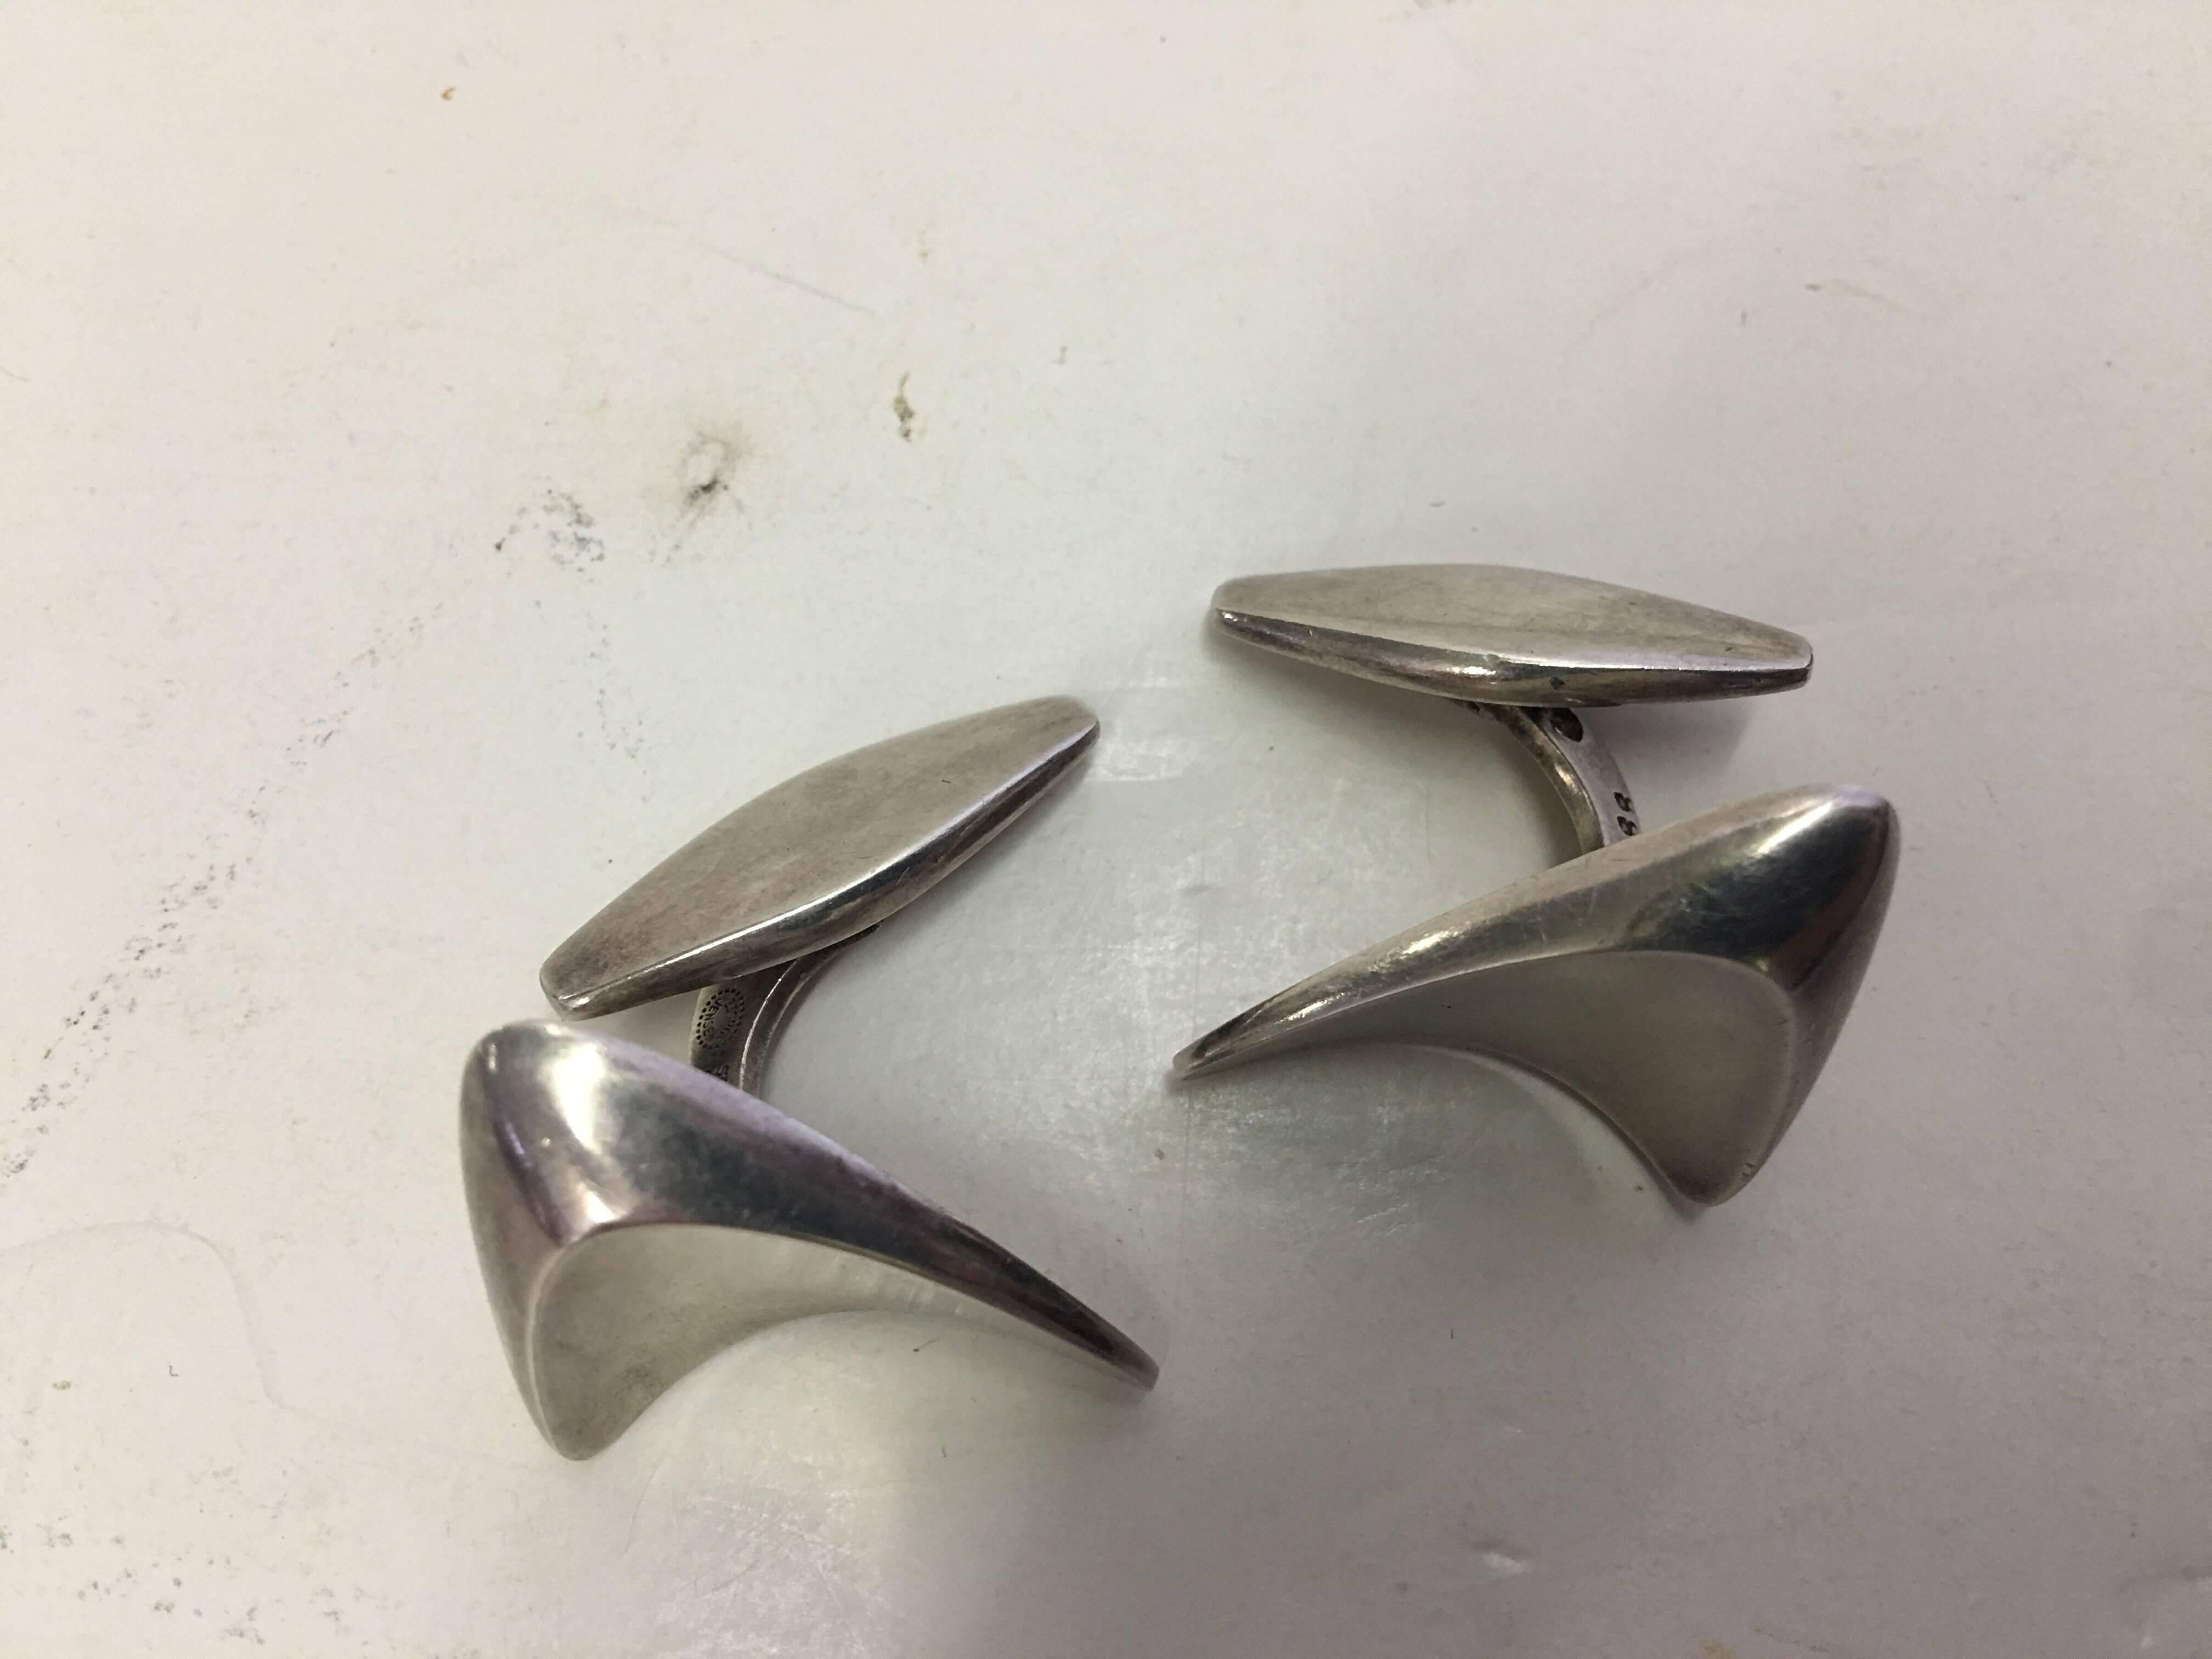 These impressive sterling silver cufflinks have a modernist design to them, in a biomorphic boomerang form. They are a Henning Koppel original design from circa 1960. Signed Georg Jensen.